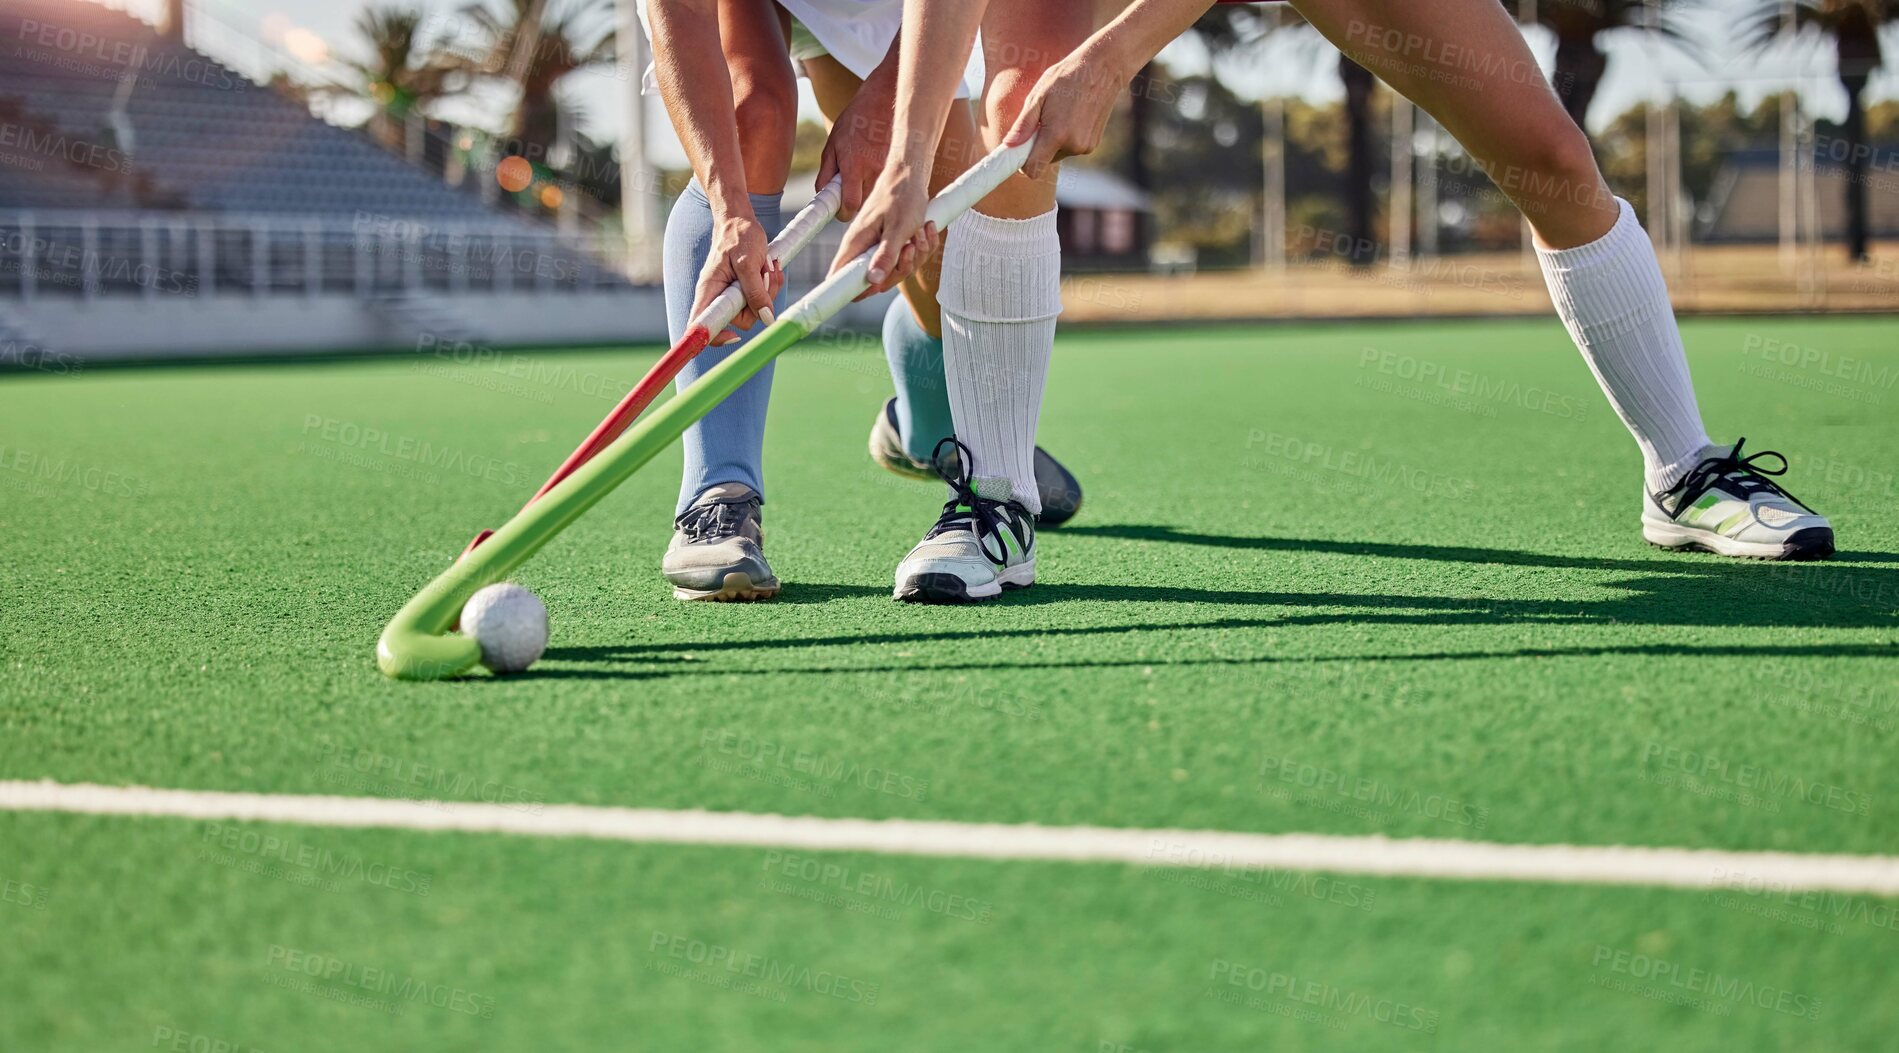 Buy stock photo Hockey, field and athletes playing a game at a championship or sports training at an outdoor stadium. Fitness, action and team with sticks and a ball doing a exercise or skill on a sport turf court.